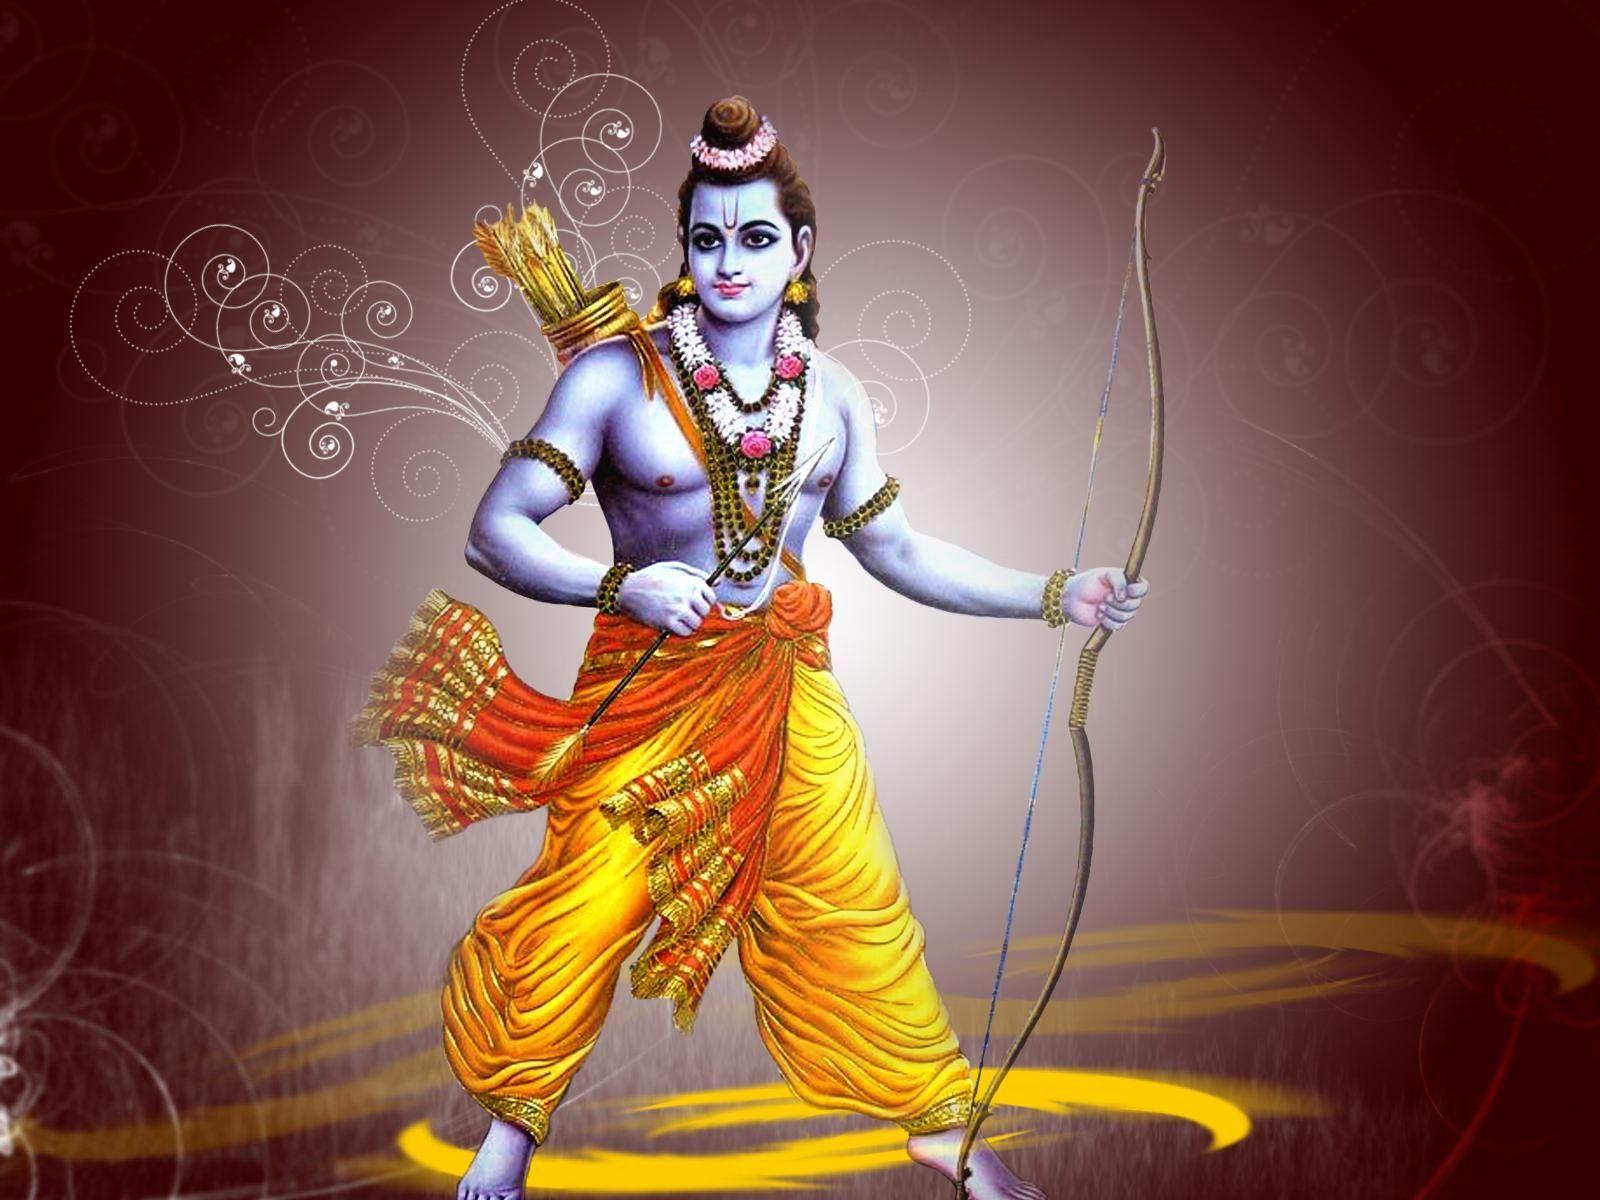 Angry Lord Rama HD Wallpapers - Wallpaper Cave